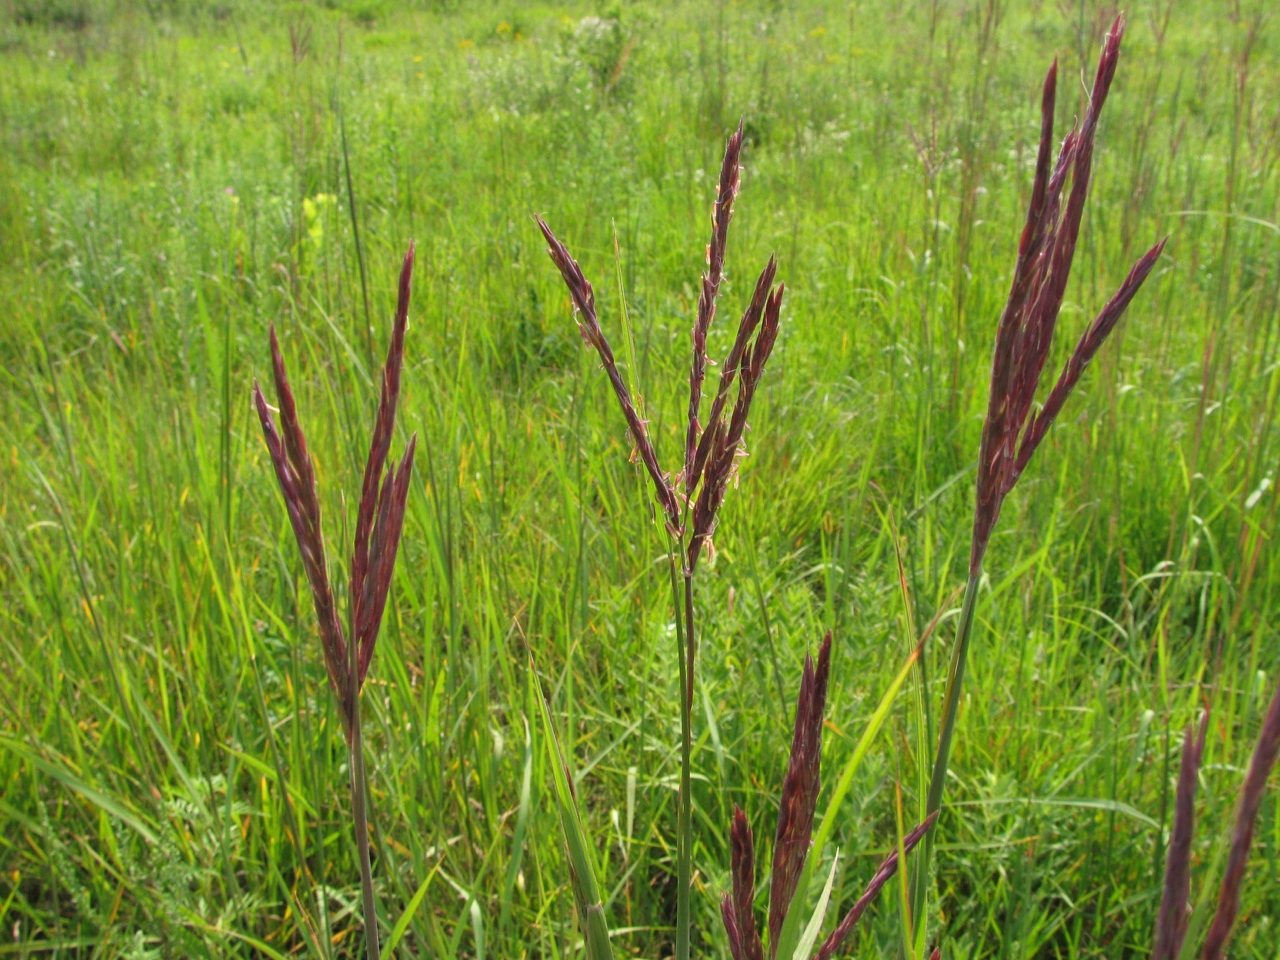 The Scientific Name is Andropogon gerardi [= Andropogon gerardii]. You will likely hear them called Big Bluestem, Turkeyfoot. This picture shows the  of Andropogon gerardi [= Andropogon gerardii]